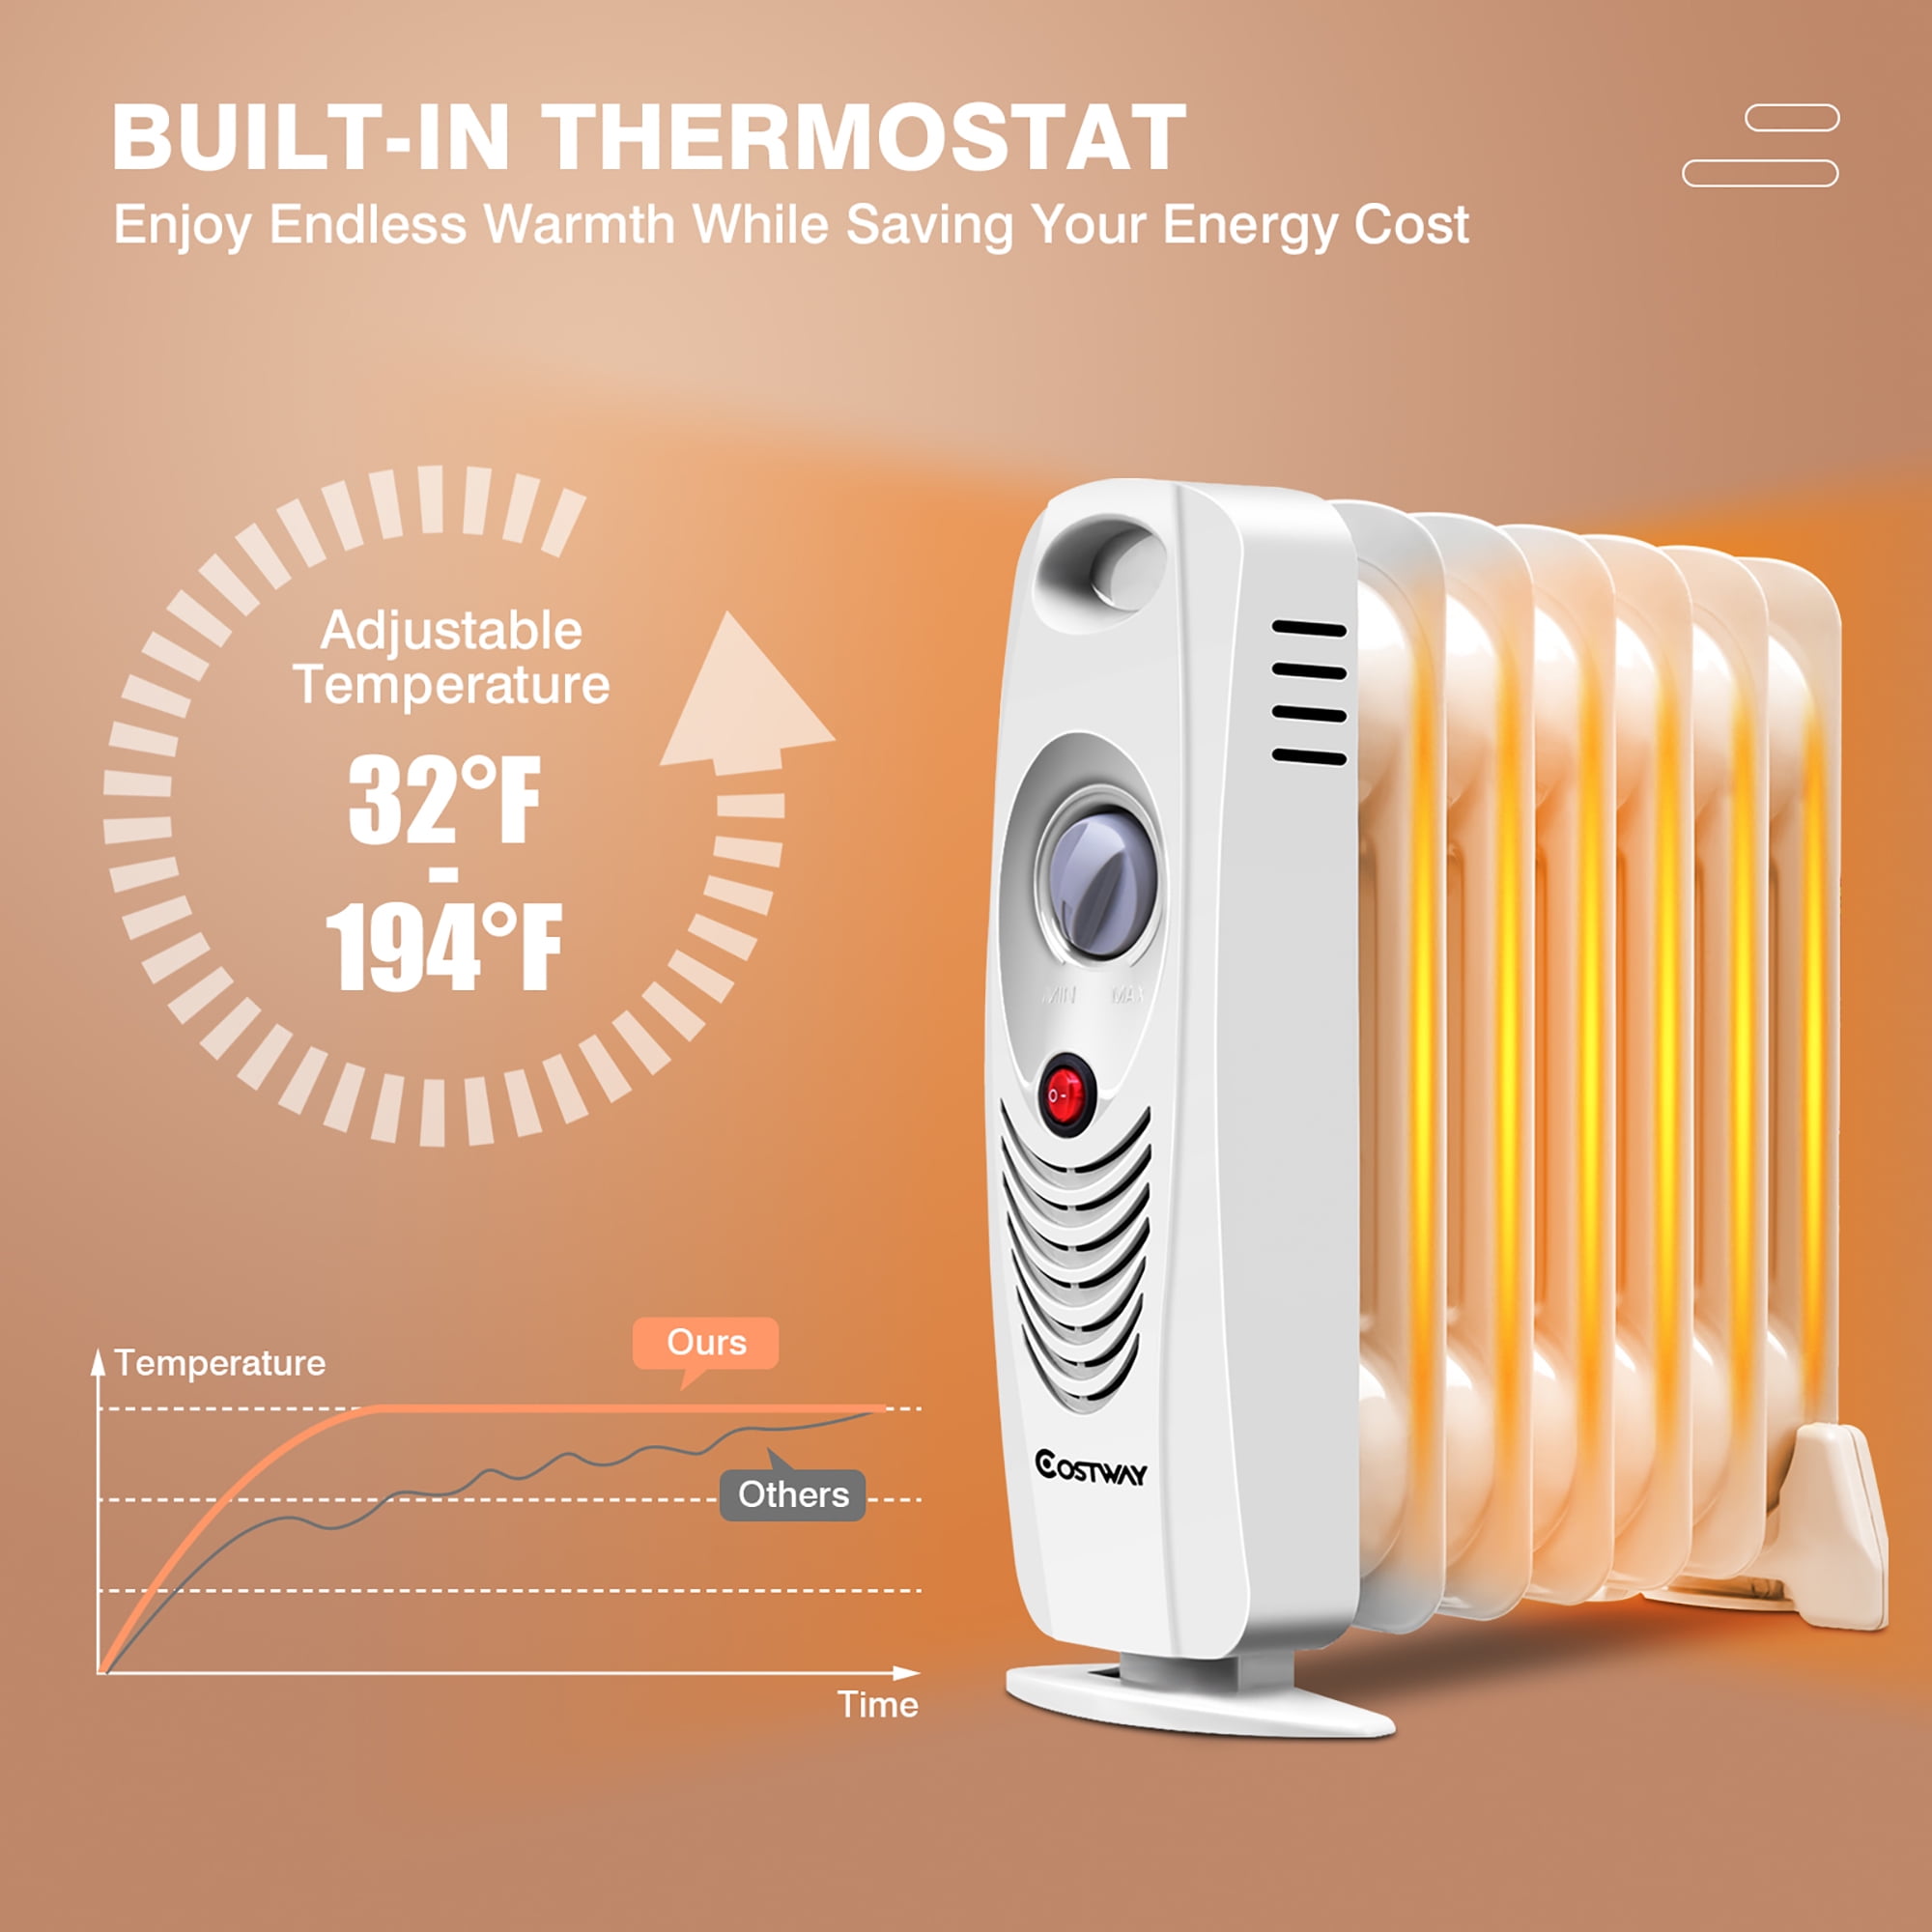 Costway 700 W Portable Mini Electric Oil Filled Radiator Heater 7-Fin  Thermostat Home 